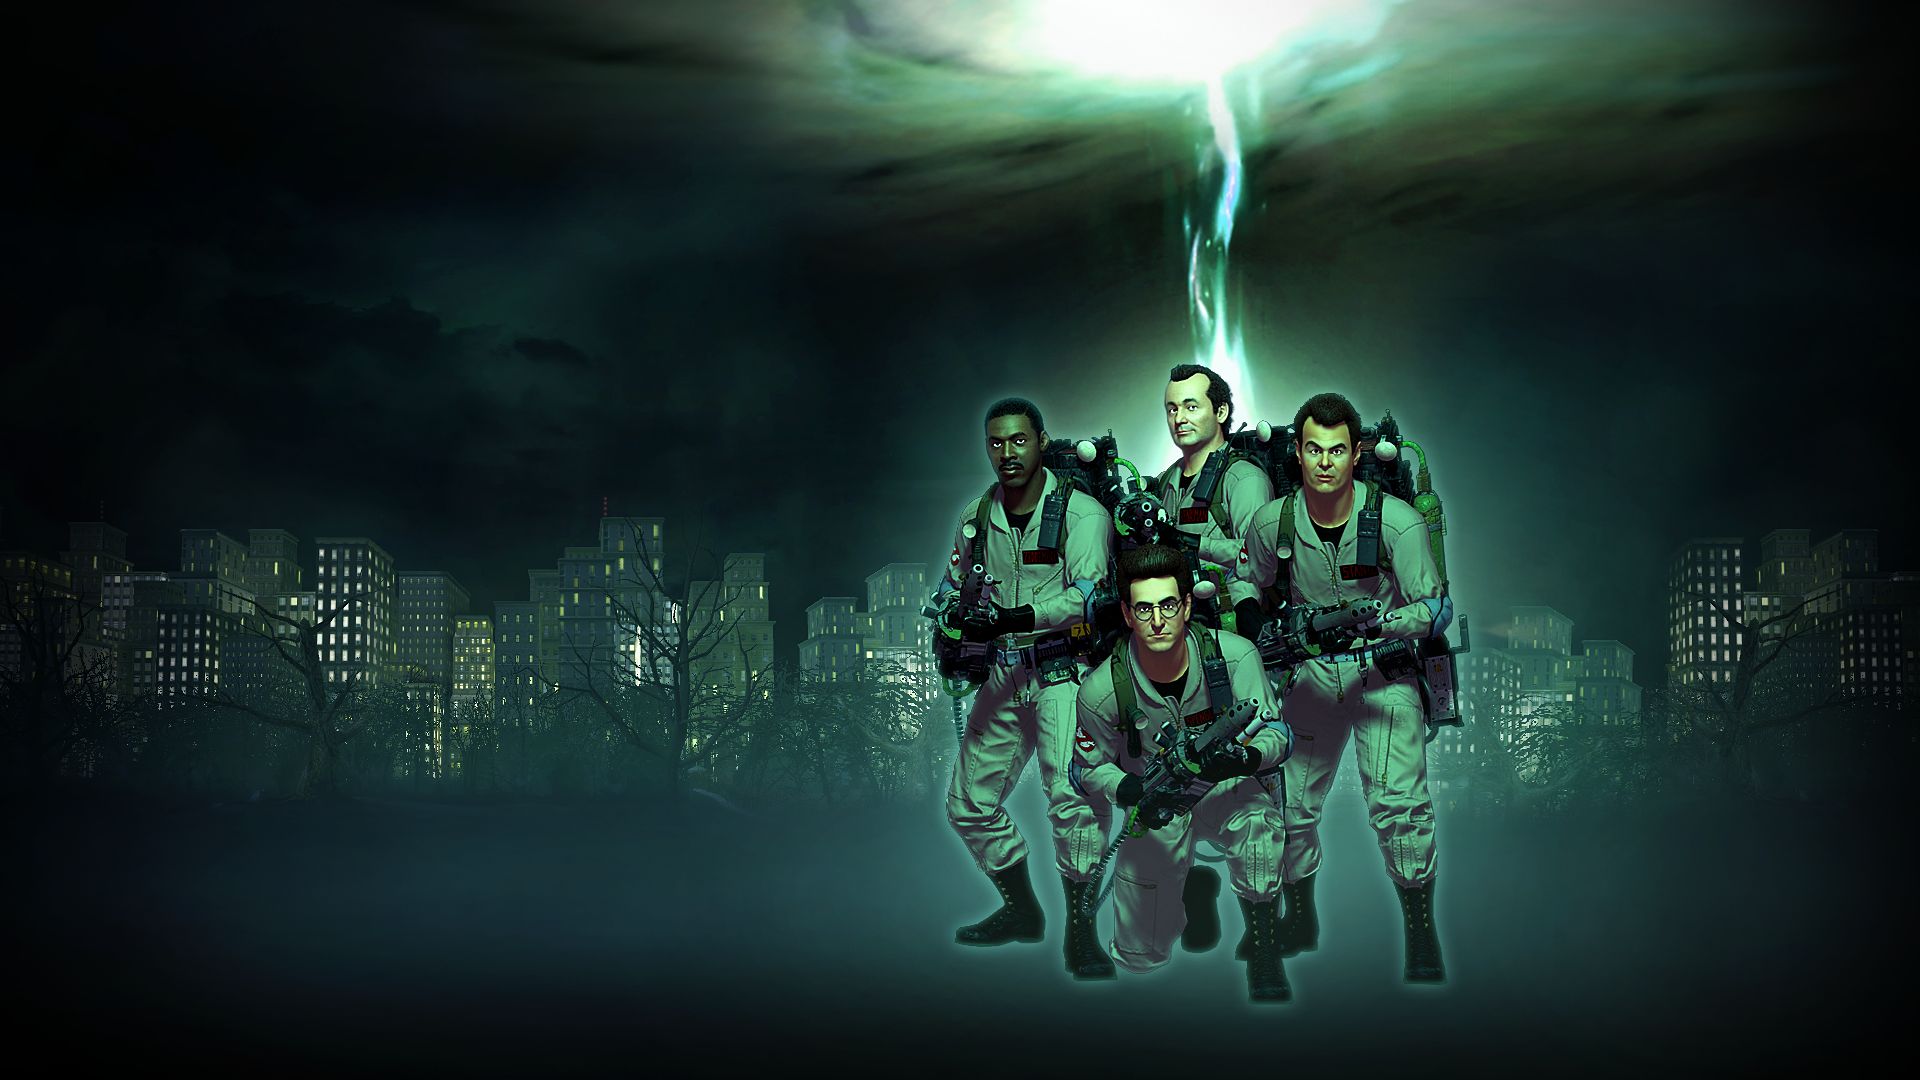 High Definition Ghostbusters wallpaper